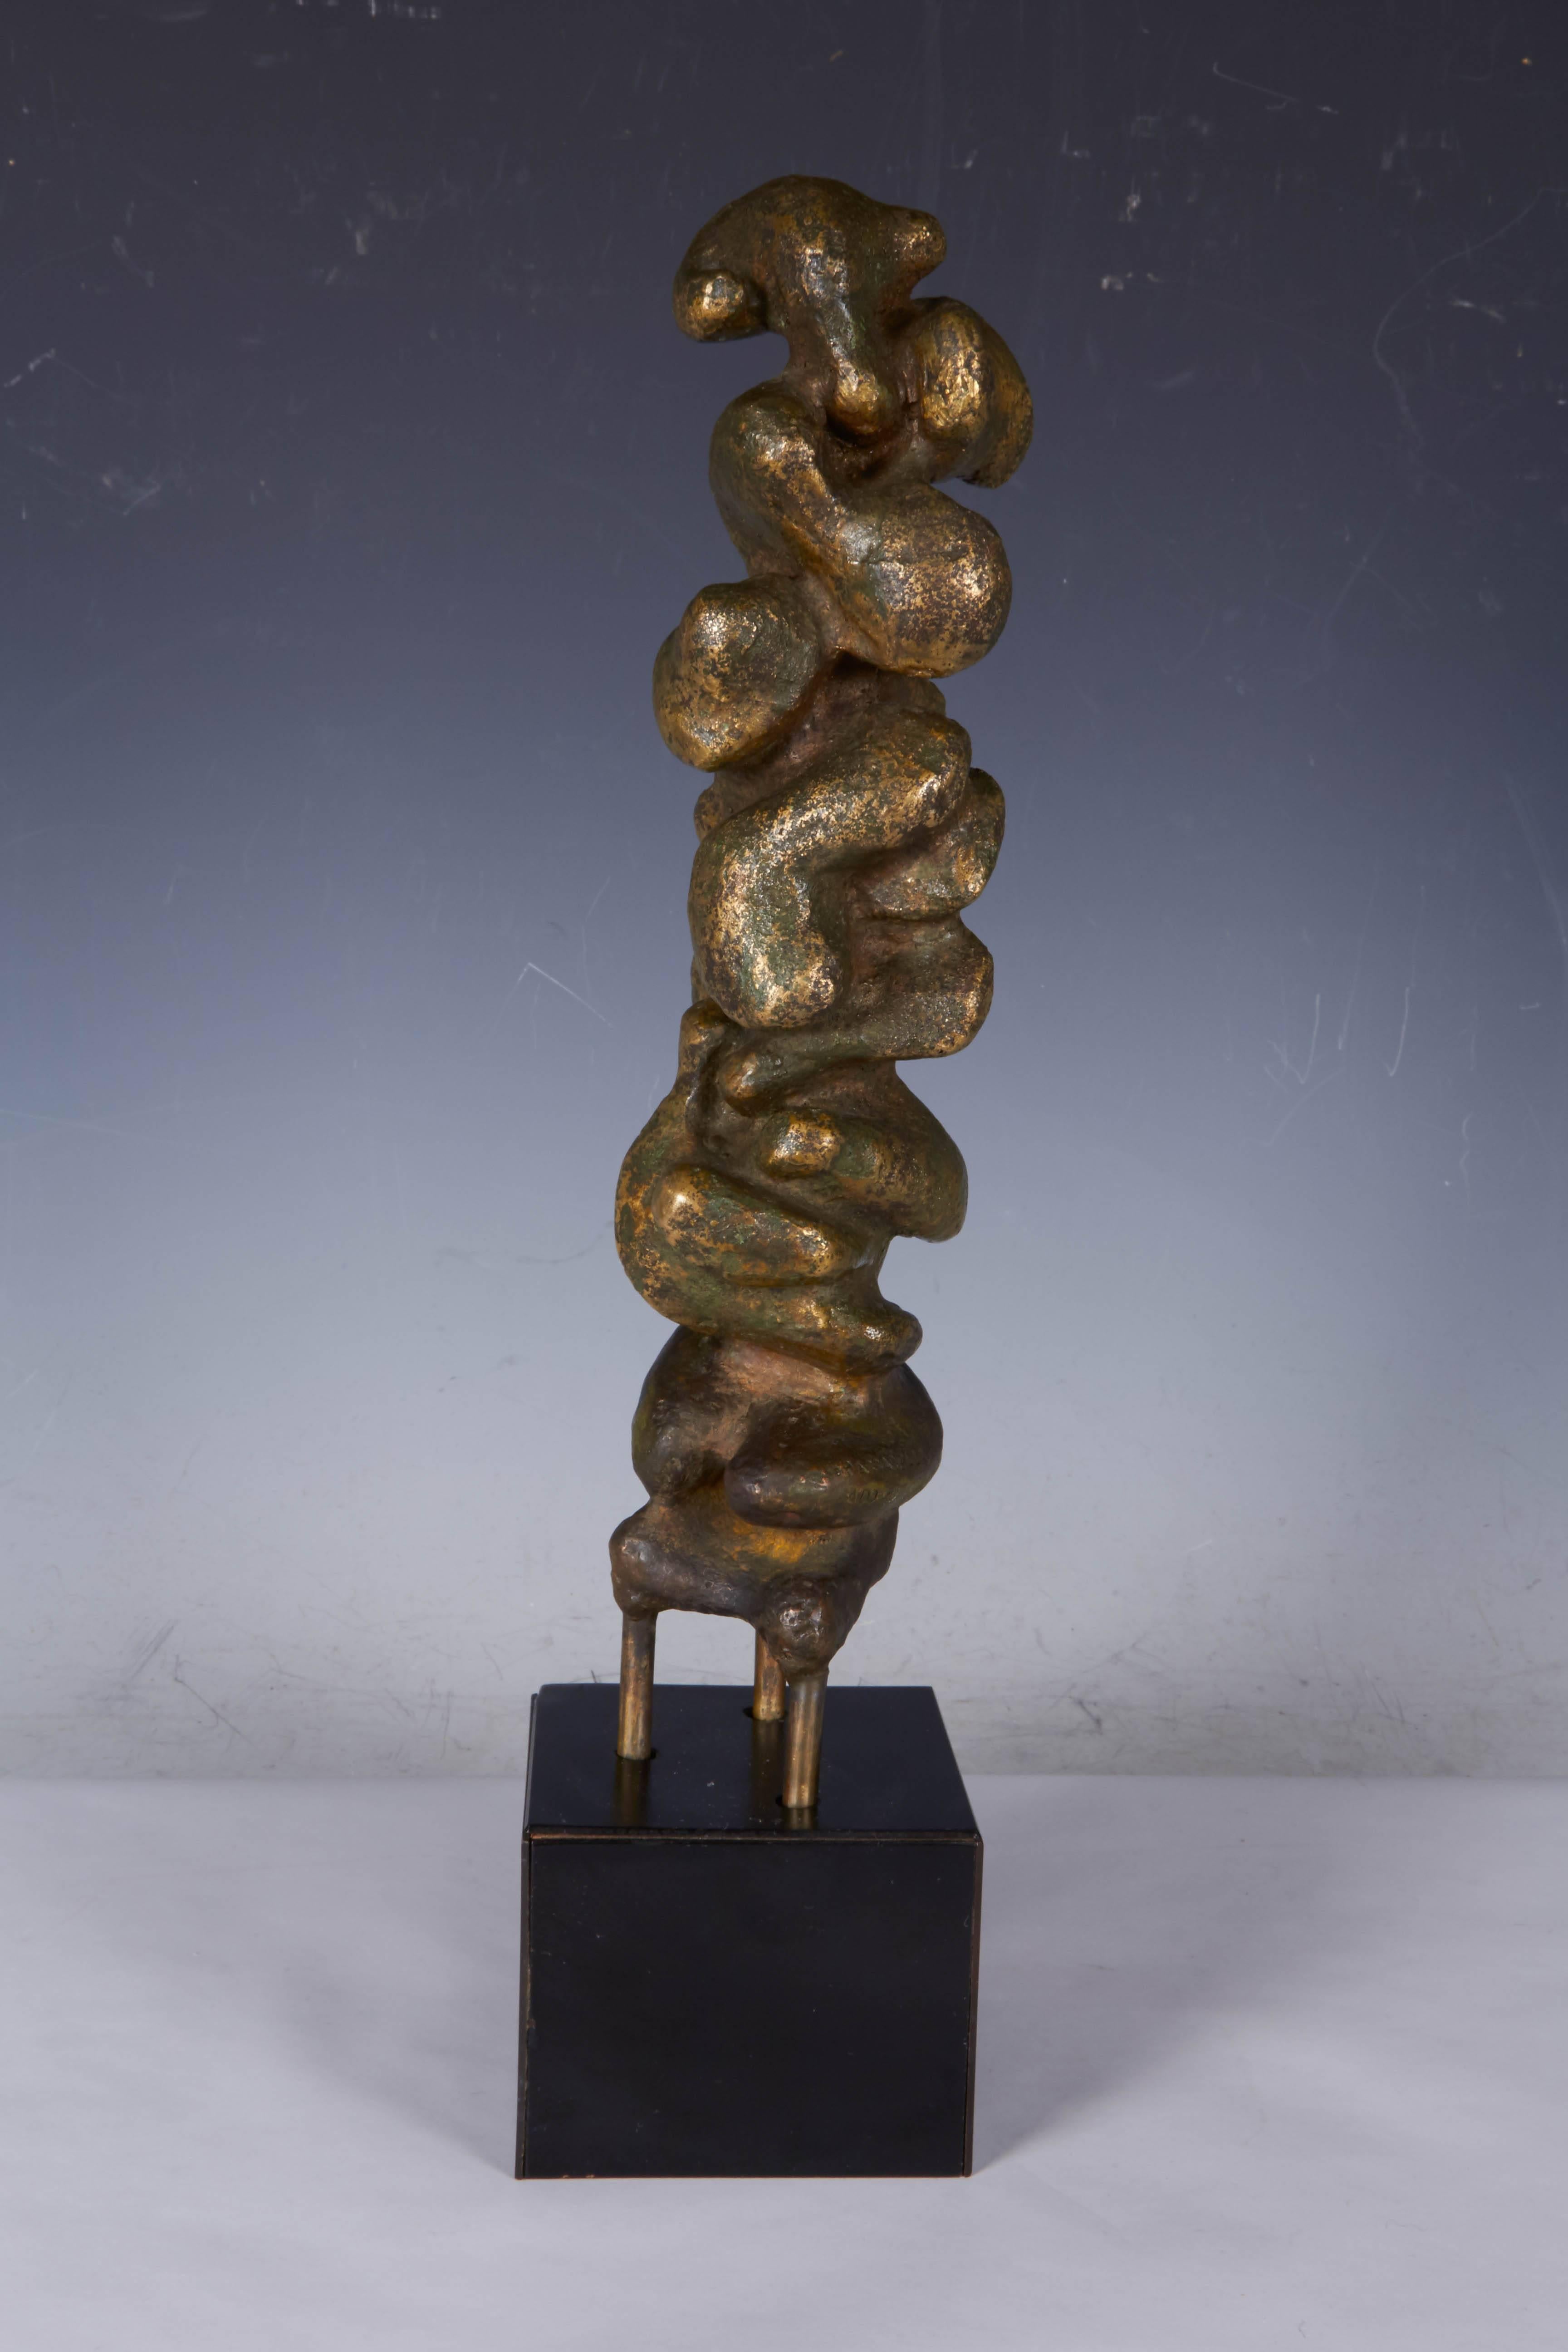 Adolfo Passarella Brutalist Abstract Bronze Sculpture, Signed and Dated 1